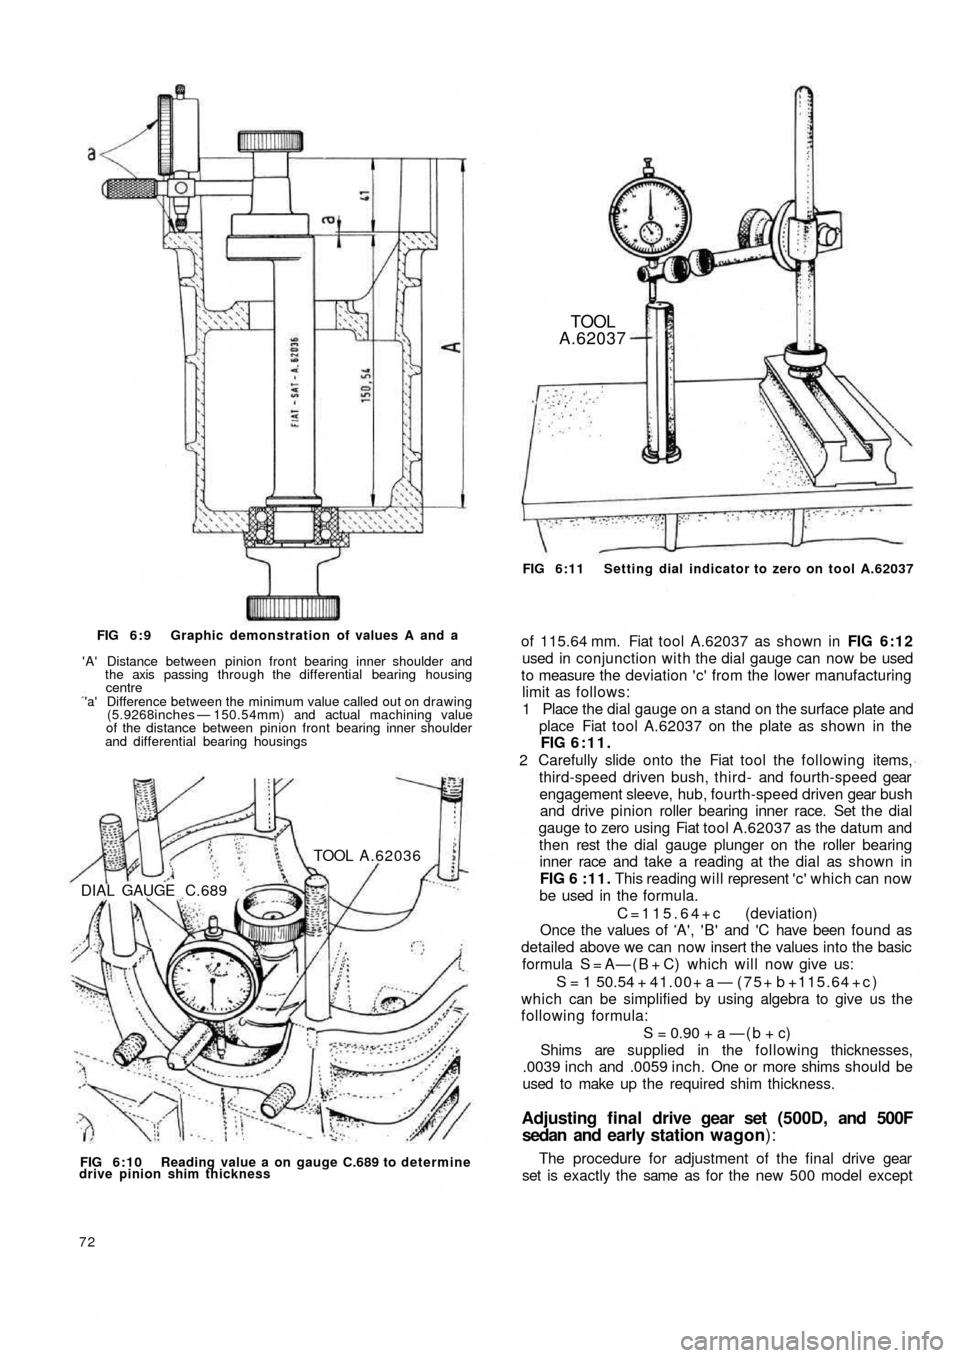 FIAT 500 1960 1.G Workshop Manual FIG 6:9  Graphic demonstration of values A and a
A Distance between pinion front bearing inner shoulder and
the axis passing through the differential bearing housing
centrea Difference between the